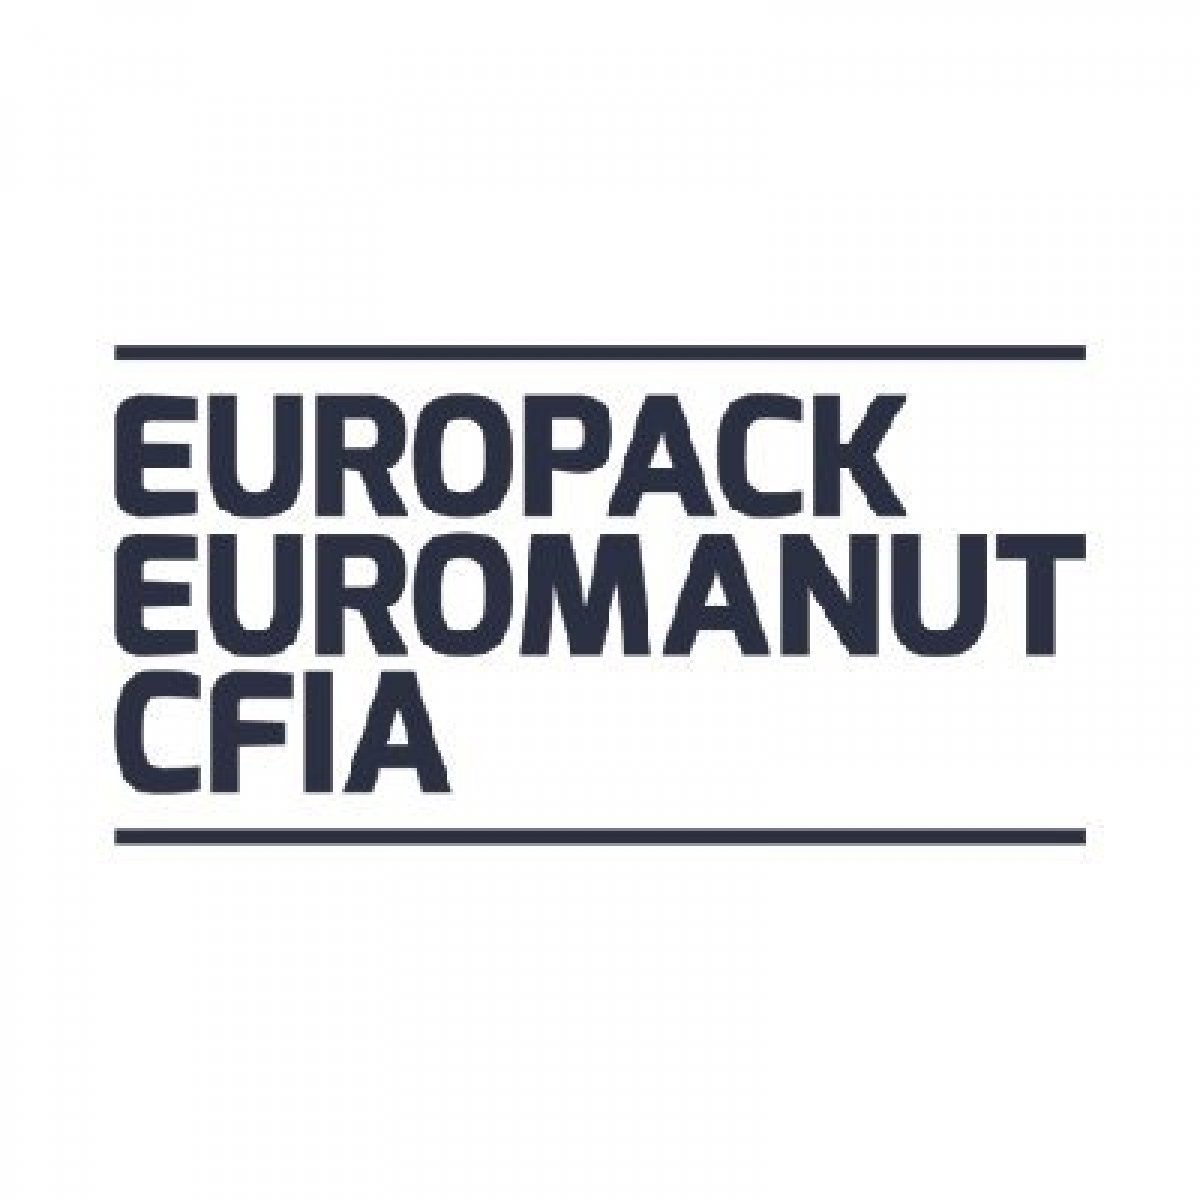 Europack Euromanut CFIA - The exhibition of handling, packaging and process